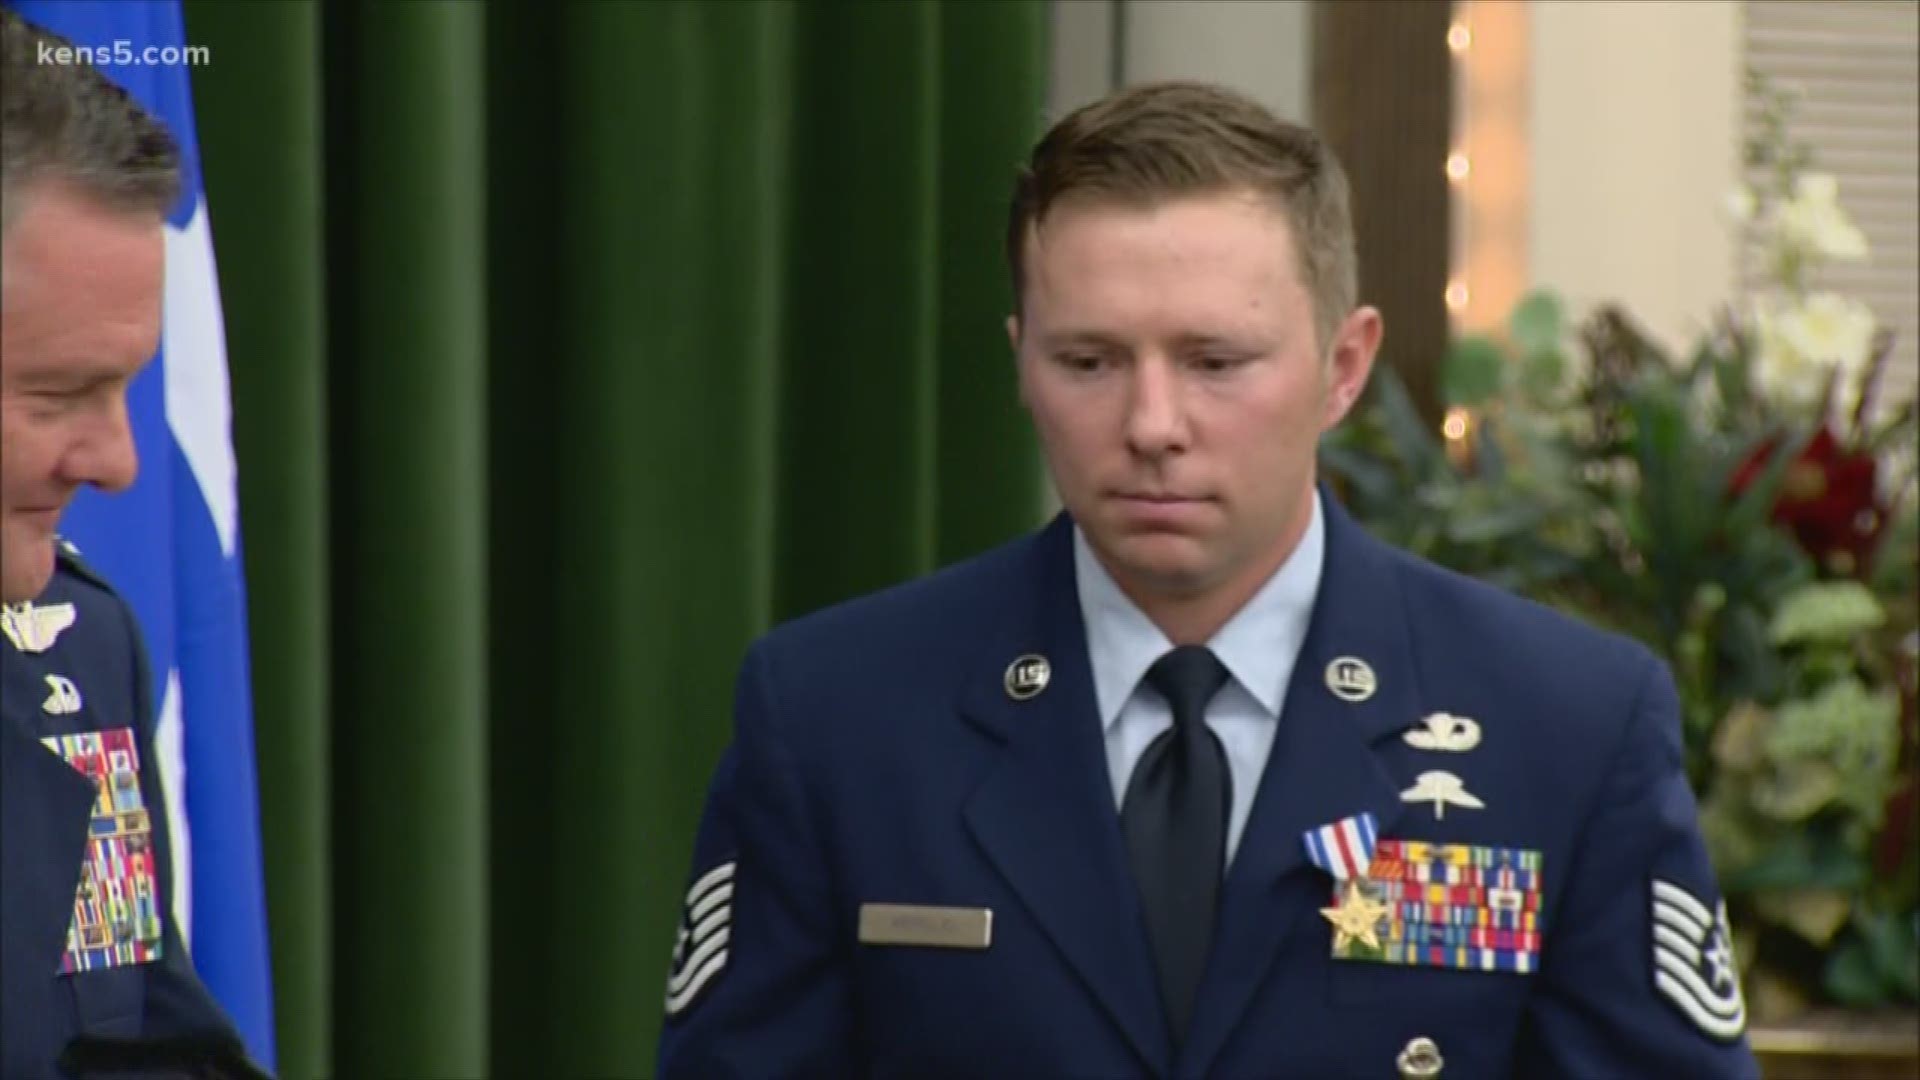 Michael Perolio was recognized for jumping into action when enemy fighters injured three of his team members in Afghanistan.